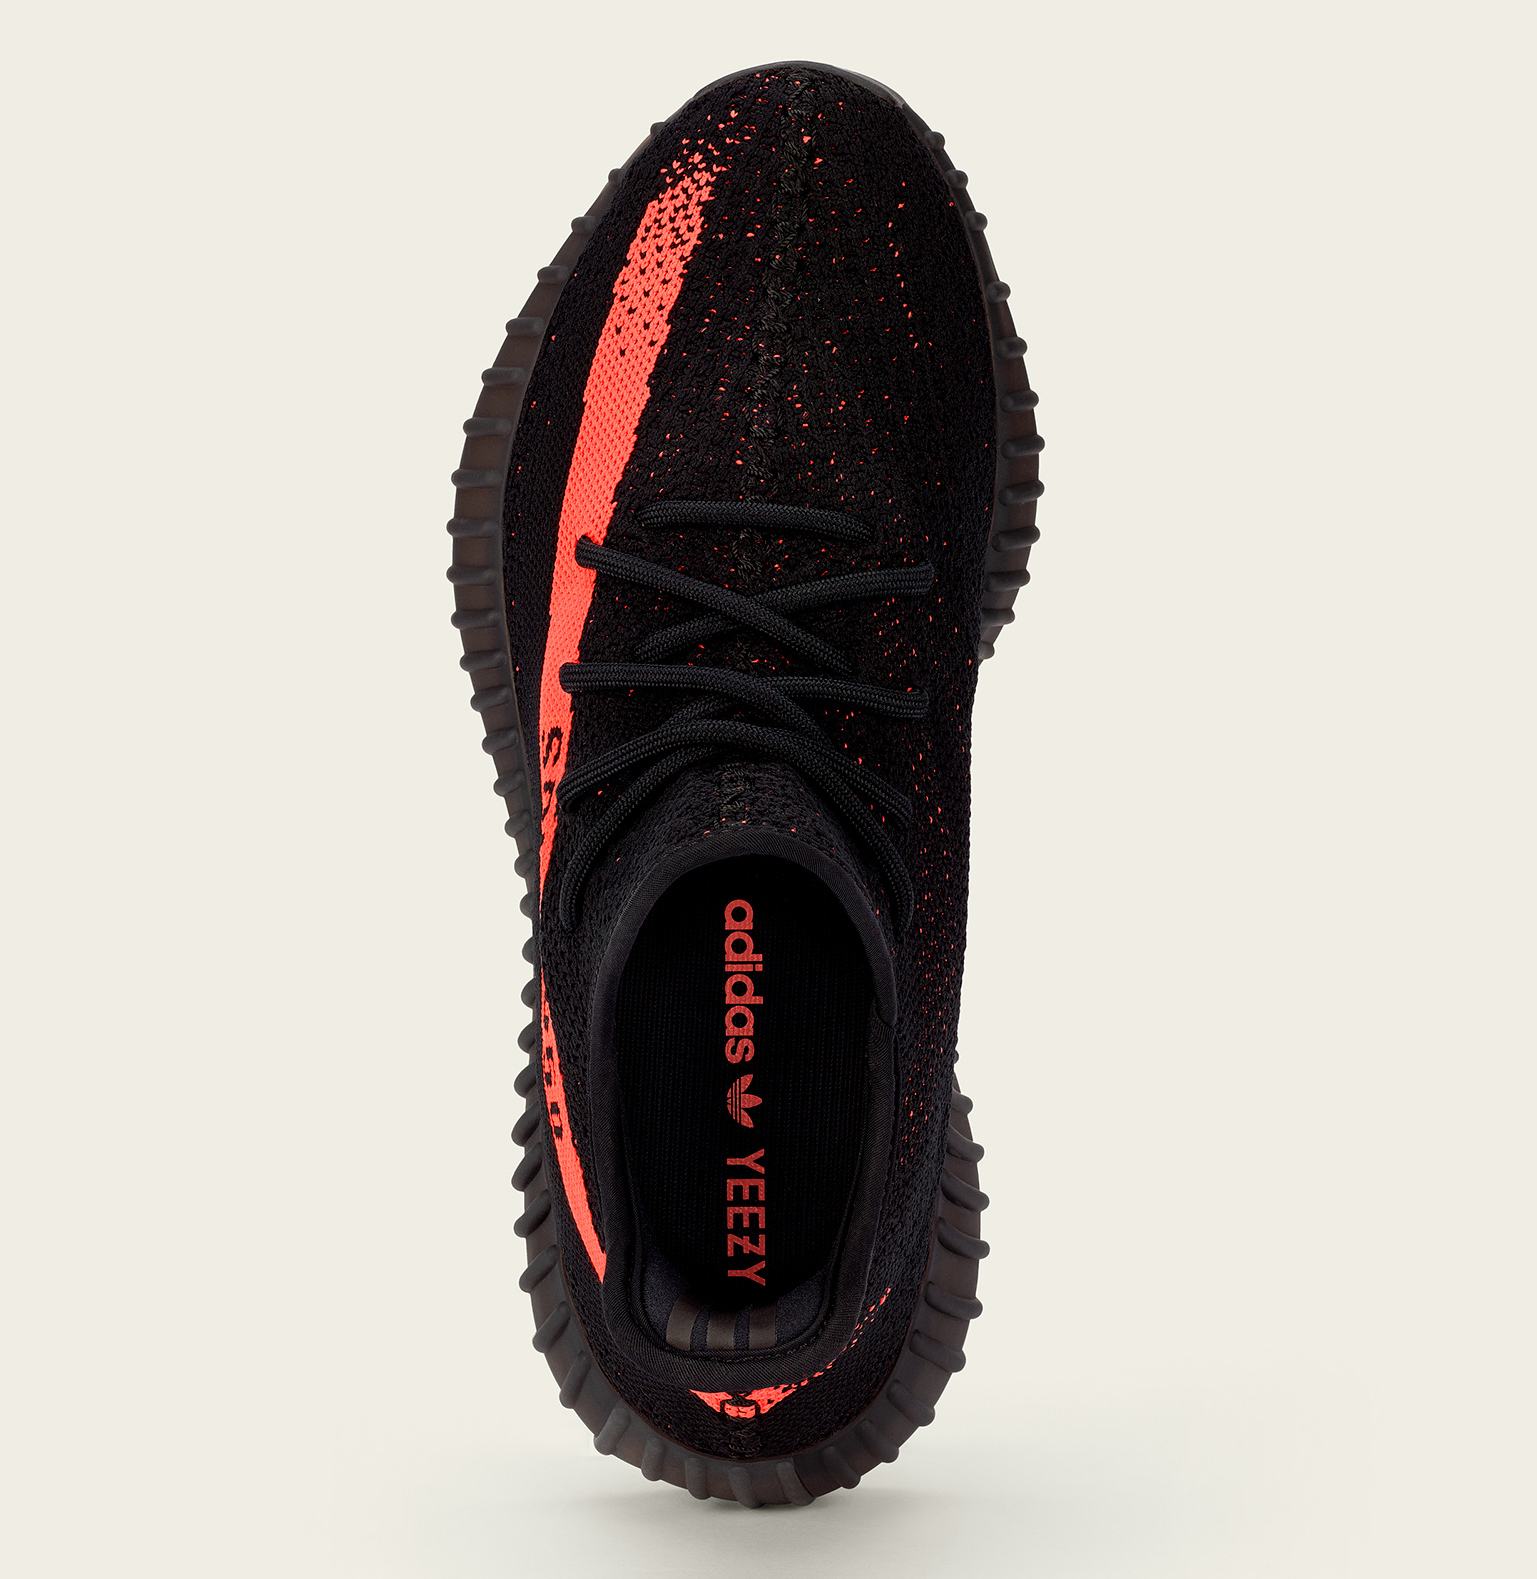 Adidas Yeezy 350 Boost V2 Store List | Sole Collector